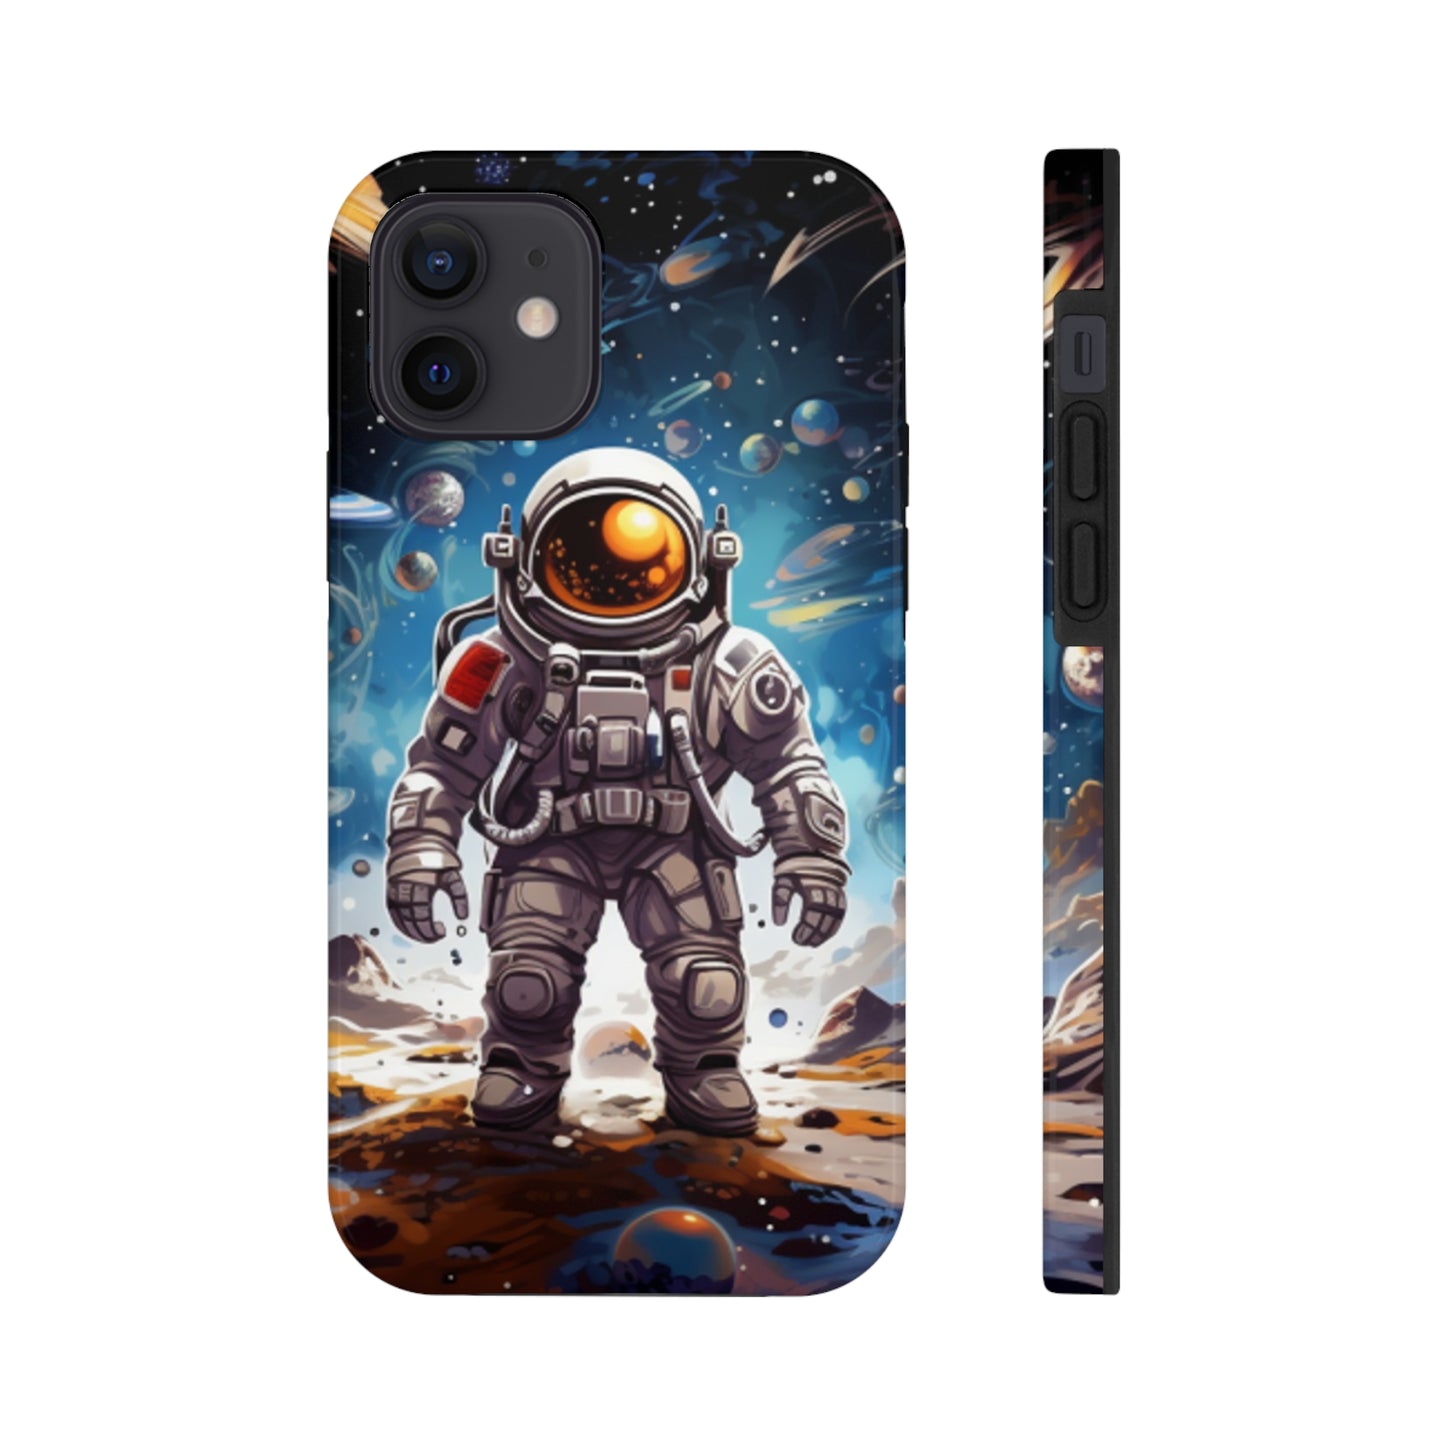 Galactic Voyage: Astronaut Journey in Celestial Star Cosmic Exploration - Tough Phone Cases